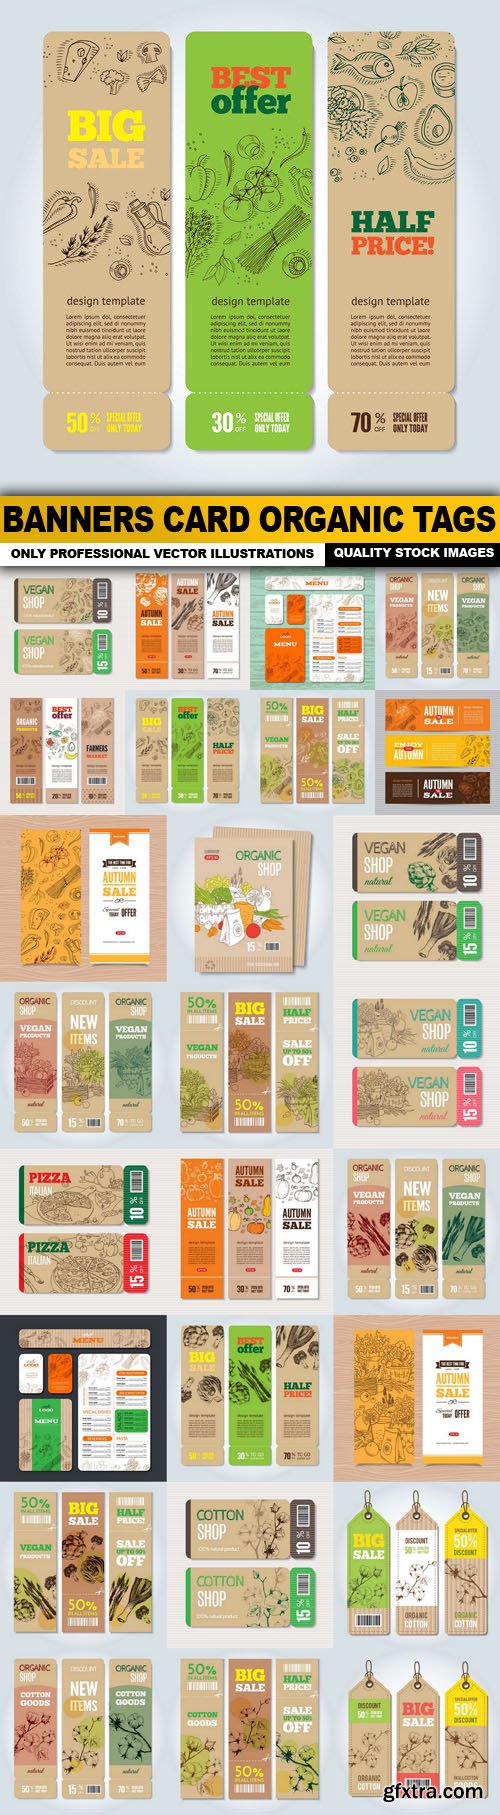 Banners Card Organic Tags - 26 Vector